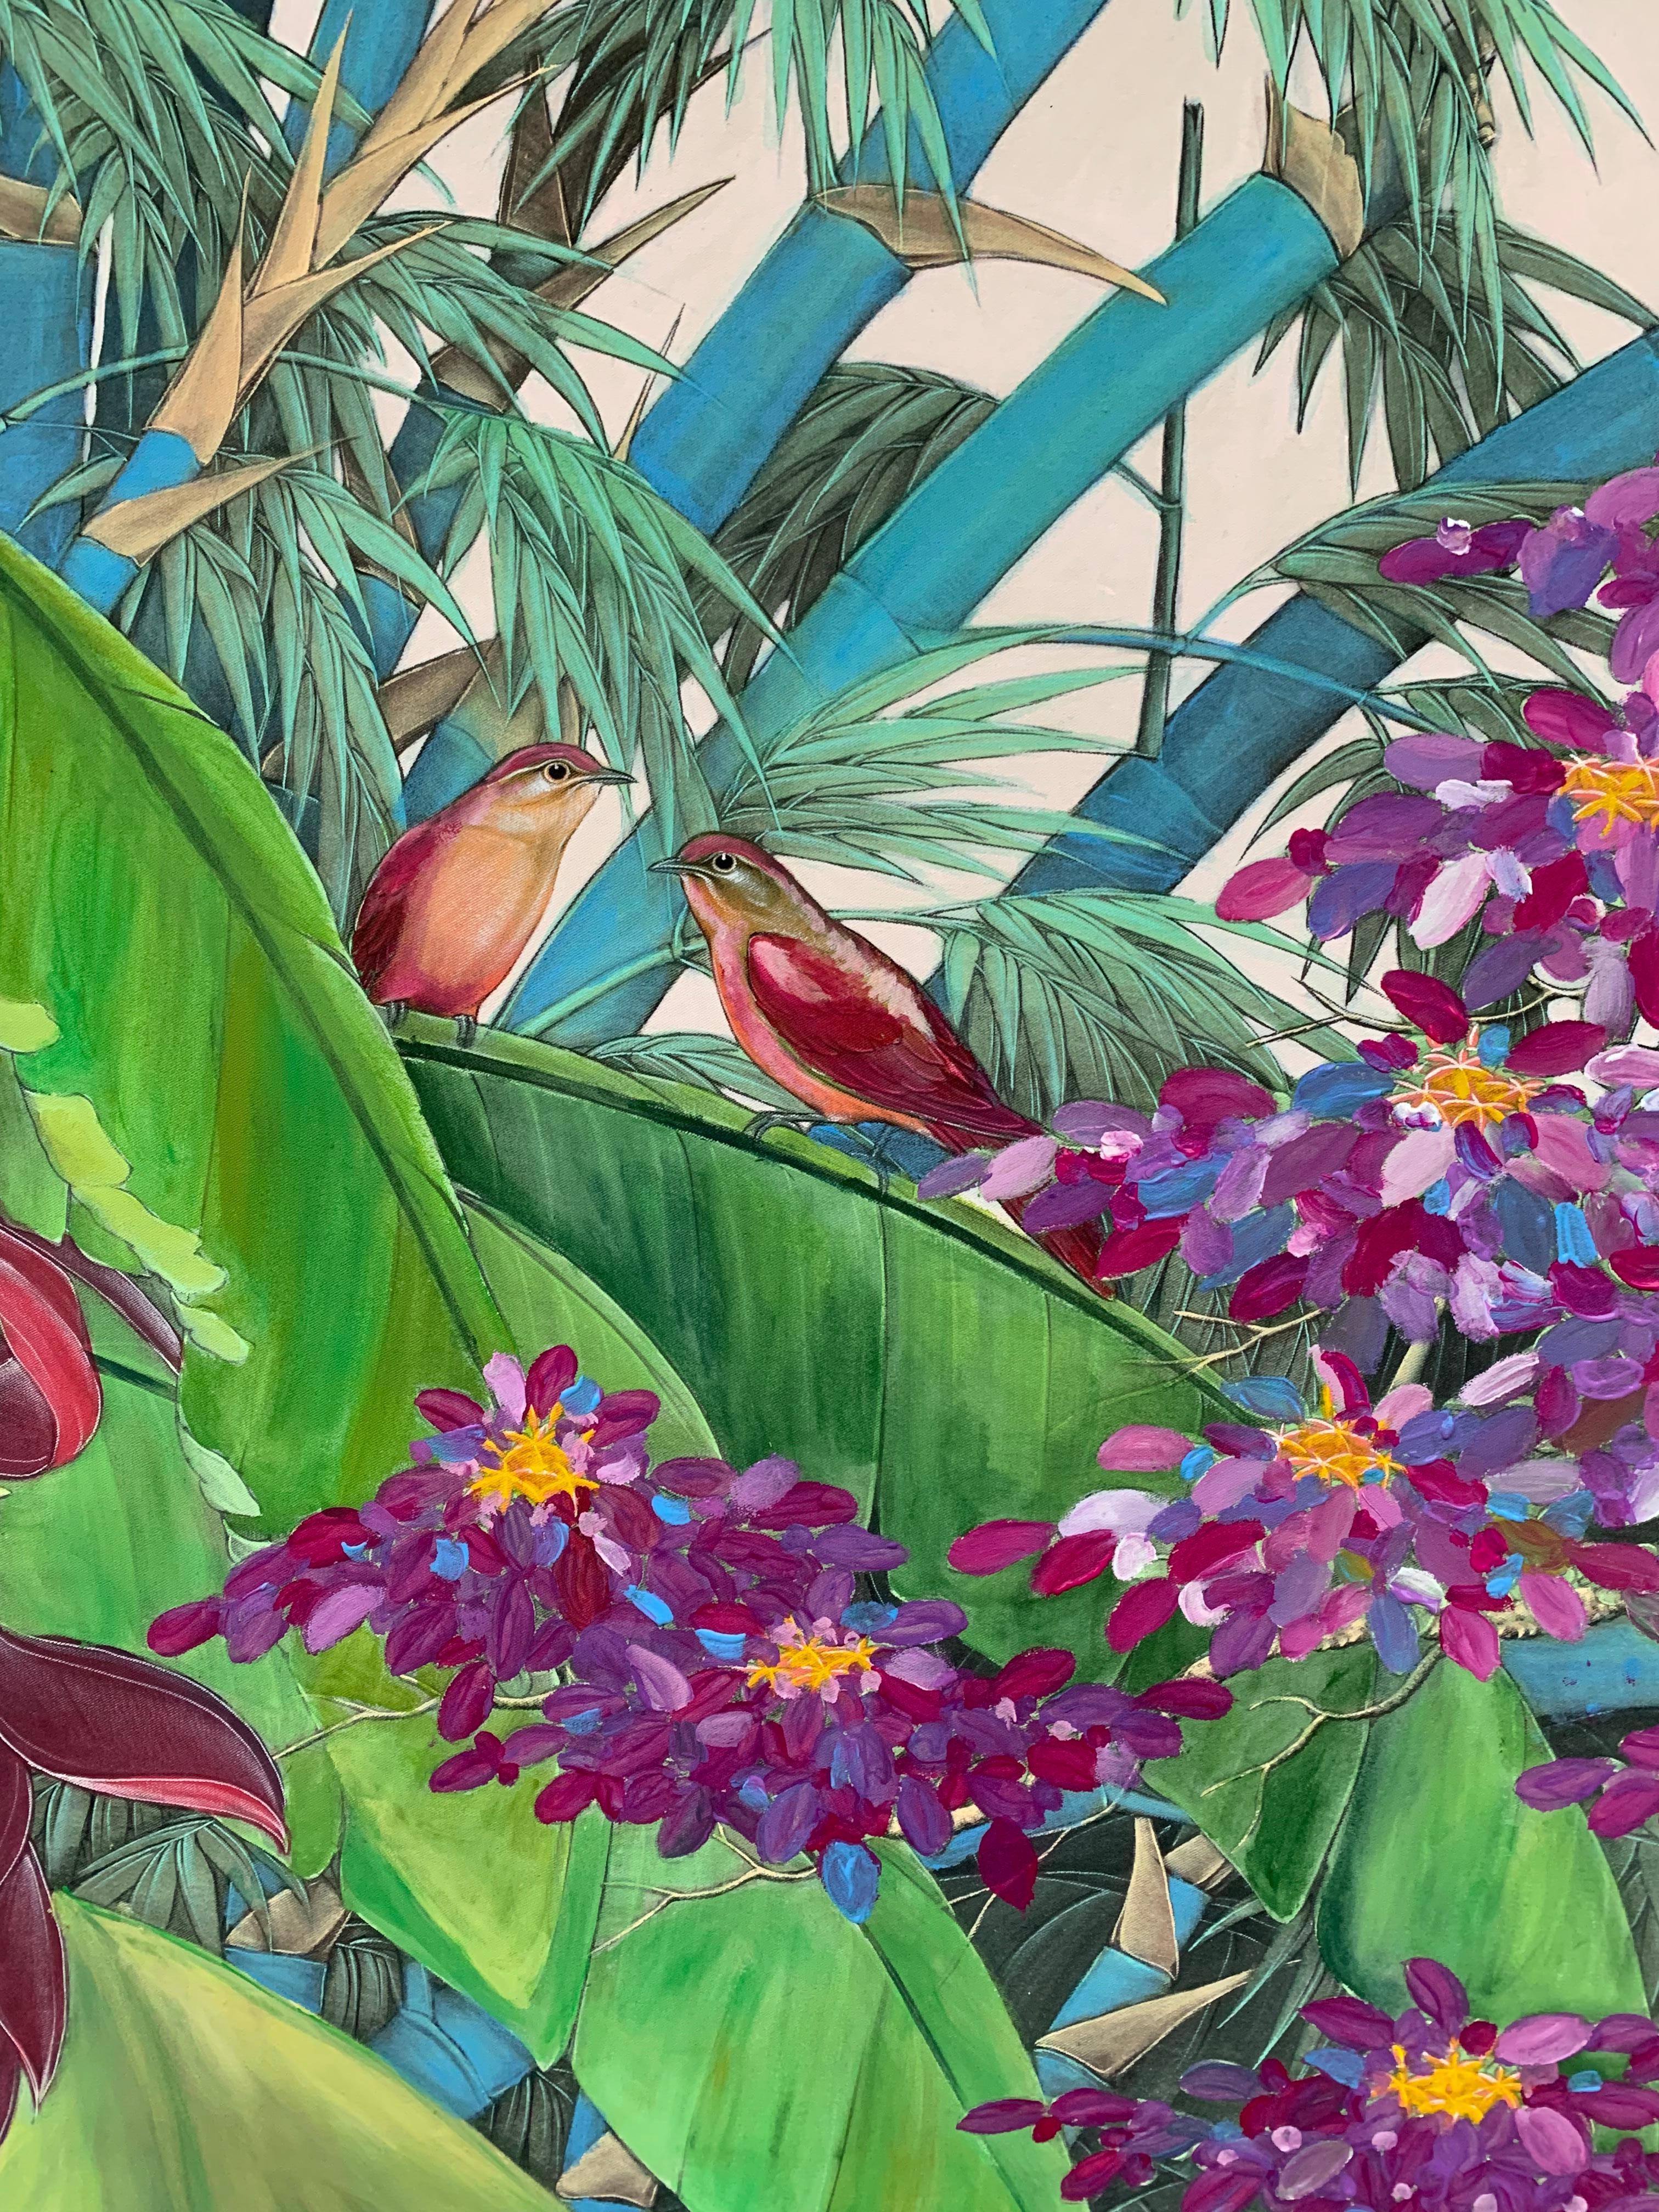 Beautiful contemporary painting full of color and movement.

Katharina Husslein has started a new body of work looking at rainforests and jungles. These beautiful parts of nature are currently under threat worldwide. Yet they are not only